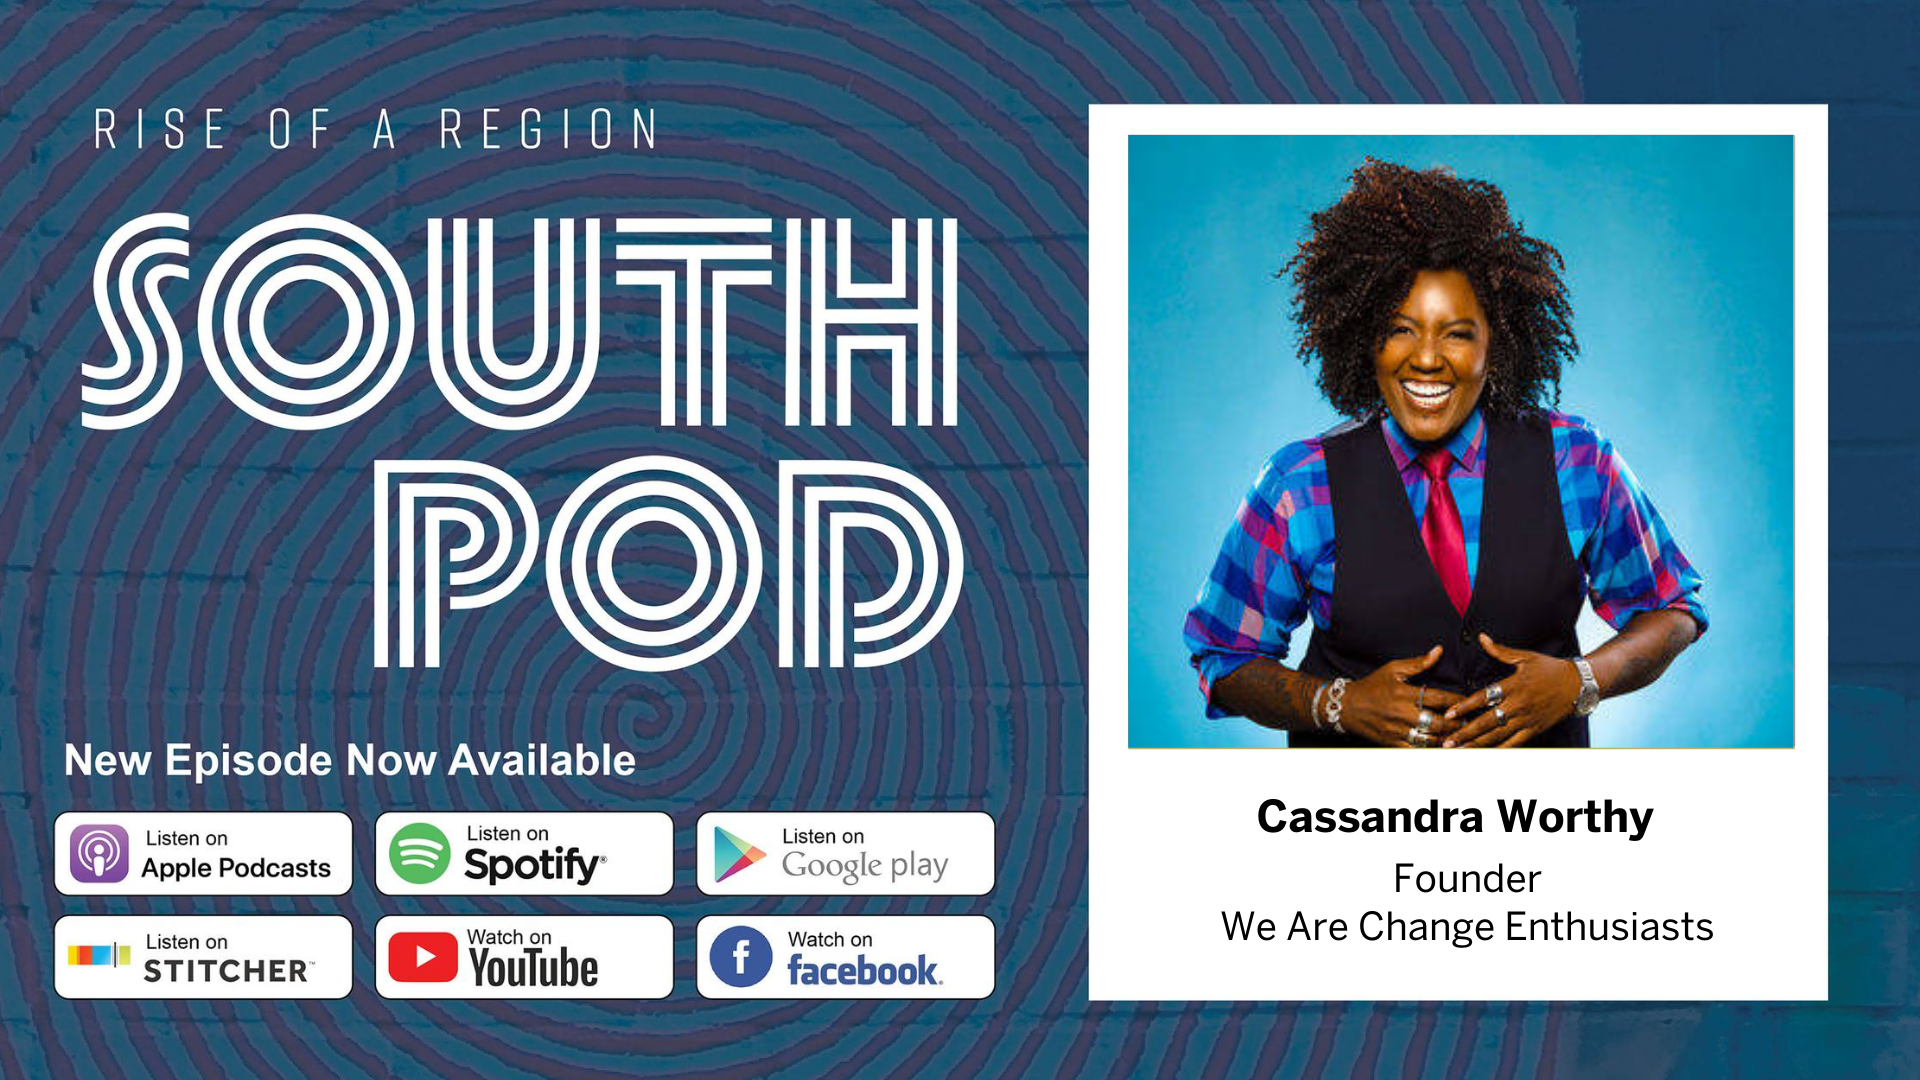 ATTN Startups: Ready to Grow and Scale? + Center for Creative Economy, Change Enthusiast Cassandra Worthy on SOUTH POD